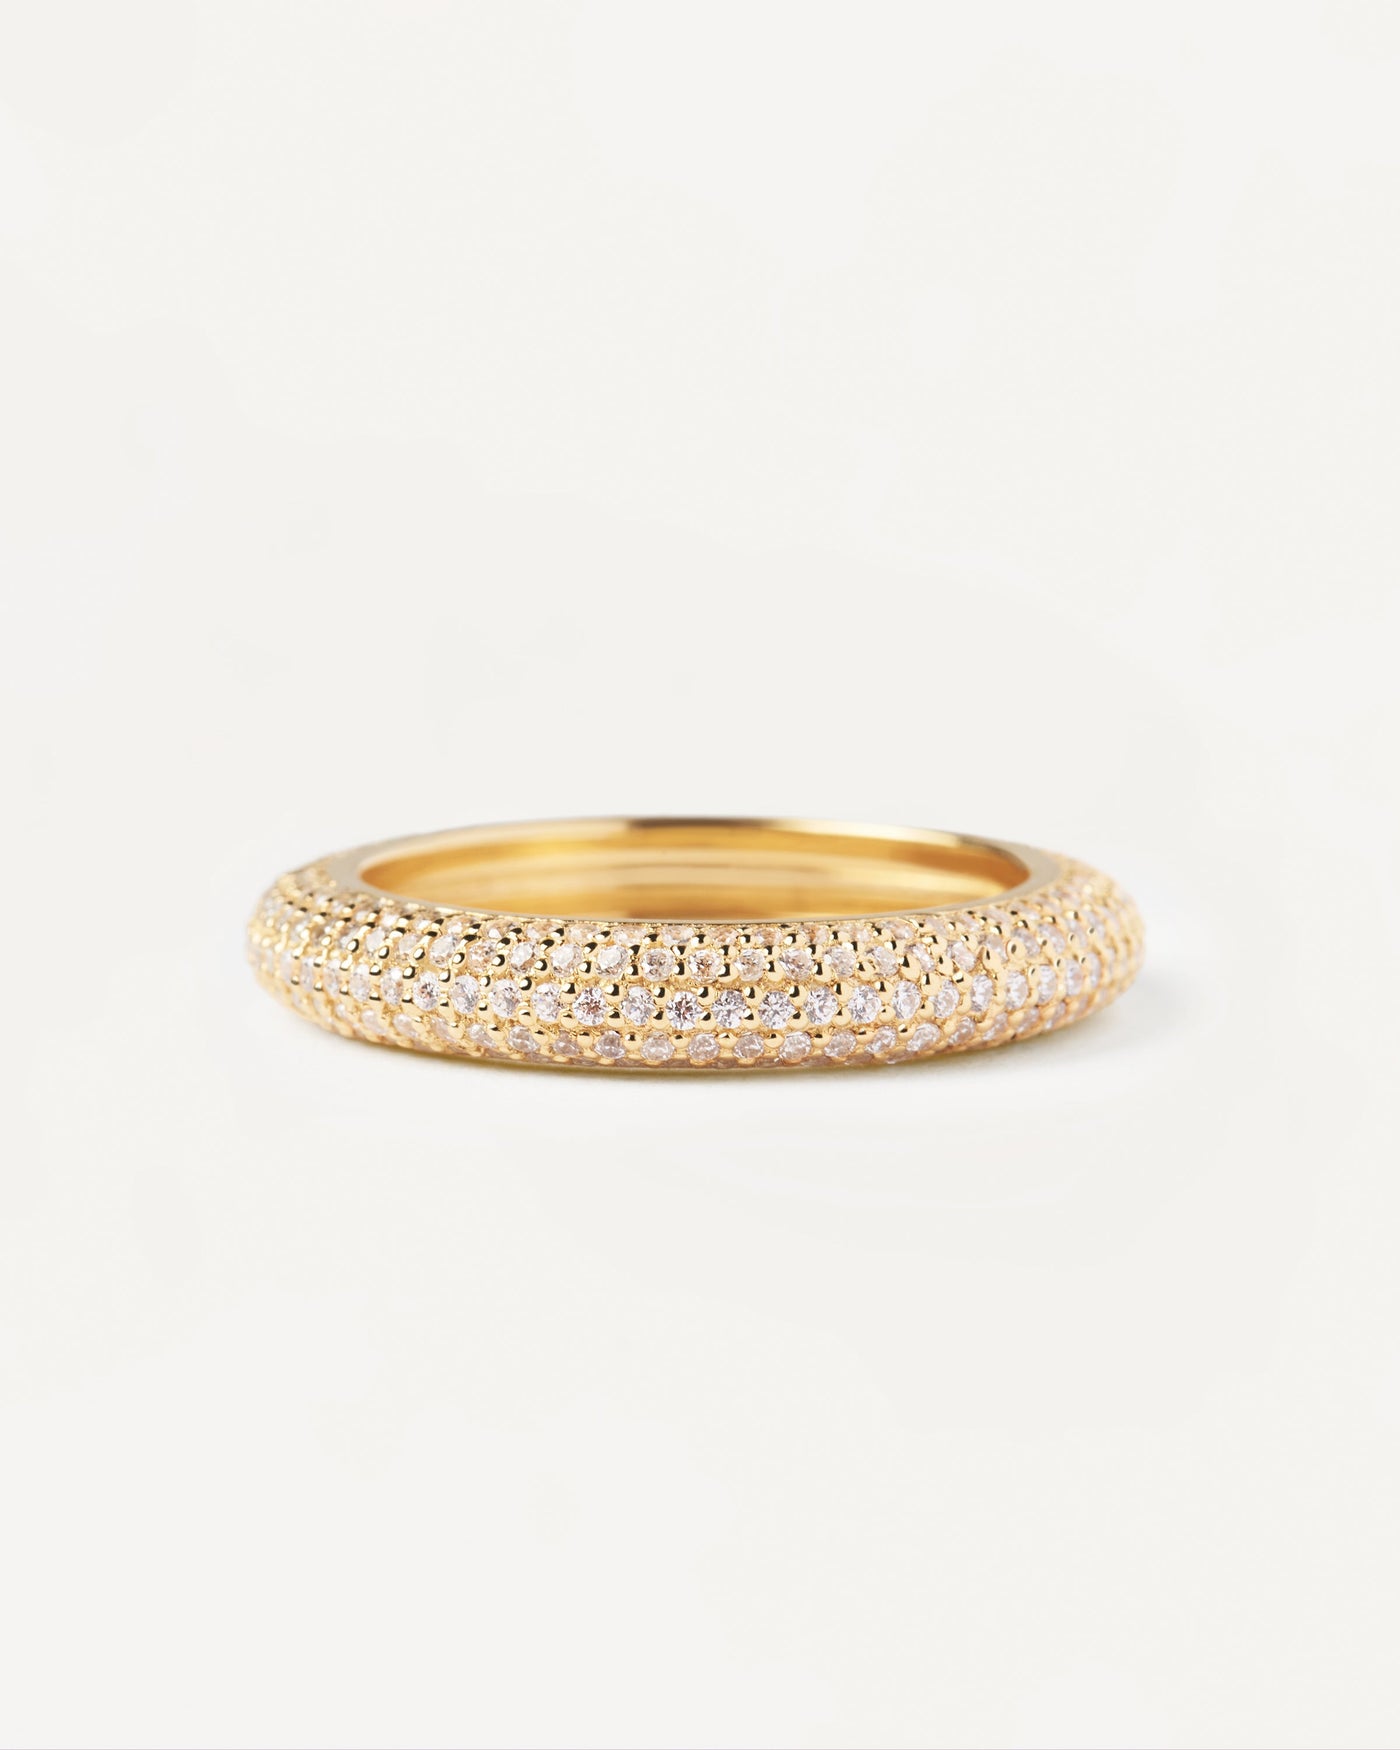 2023 Selection | King Ring. Gold-plated eternity ring with white zirconia. Get the latest arrival from PDPAOLA. Place your order safely and get this Best Seller. Free Shipping.